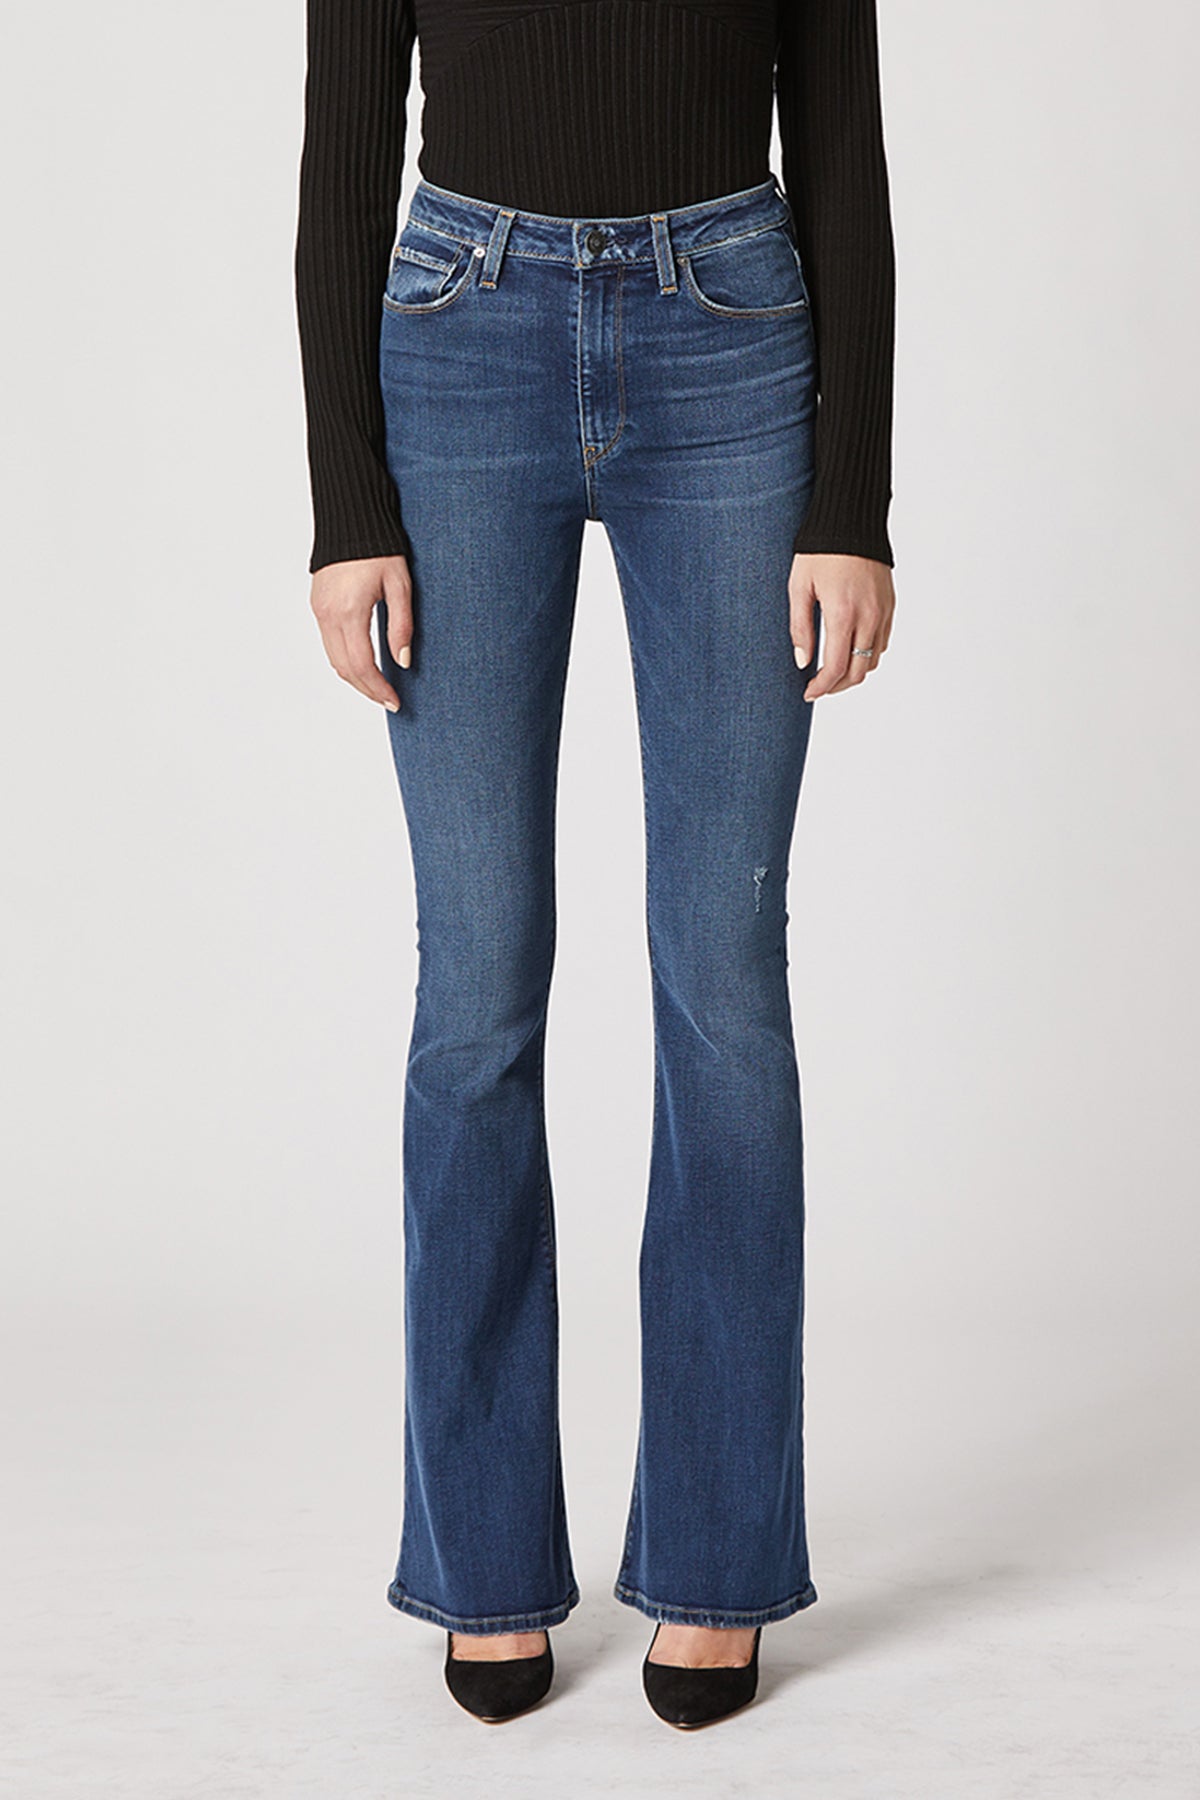 holly high rise flare jean